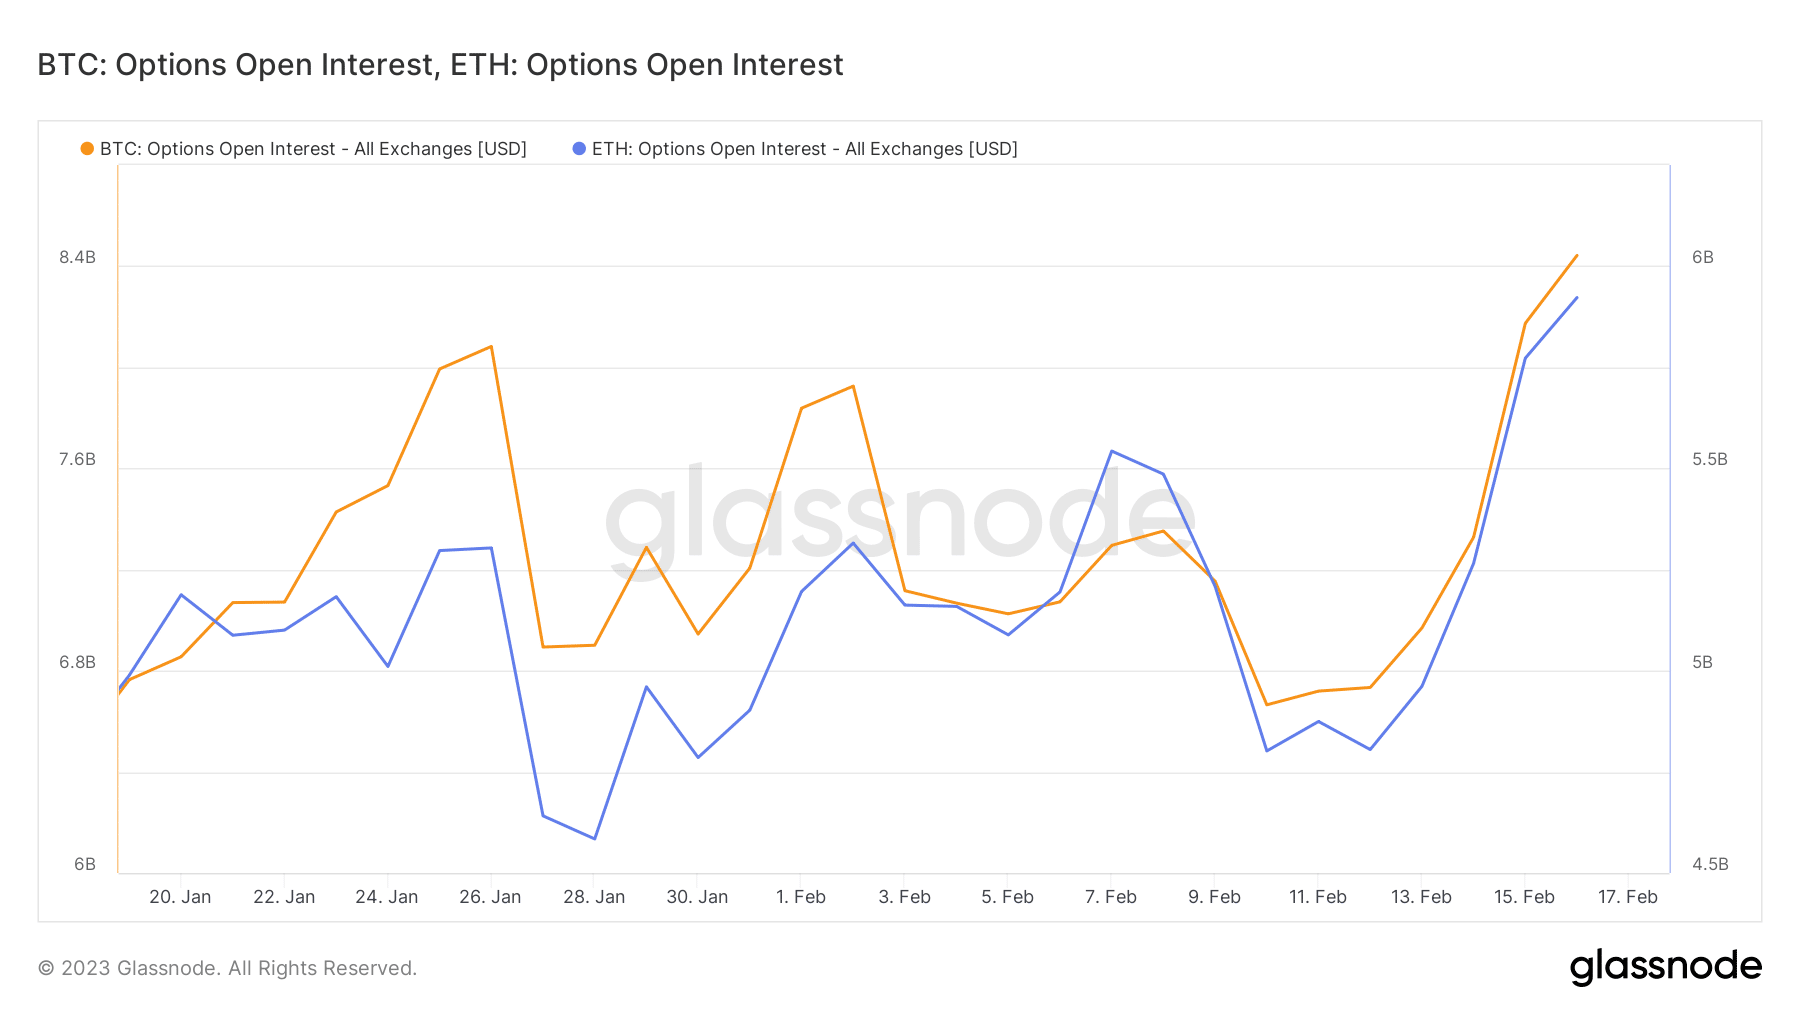 ETH and BTC options open interest